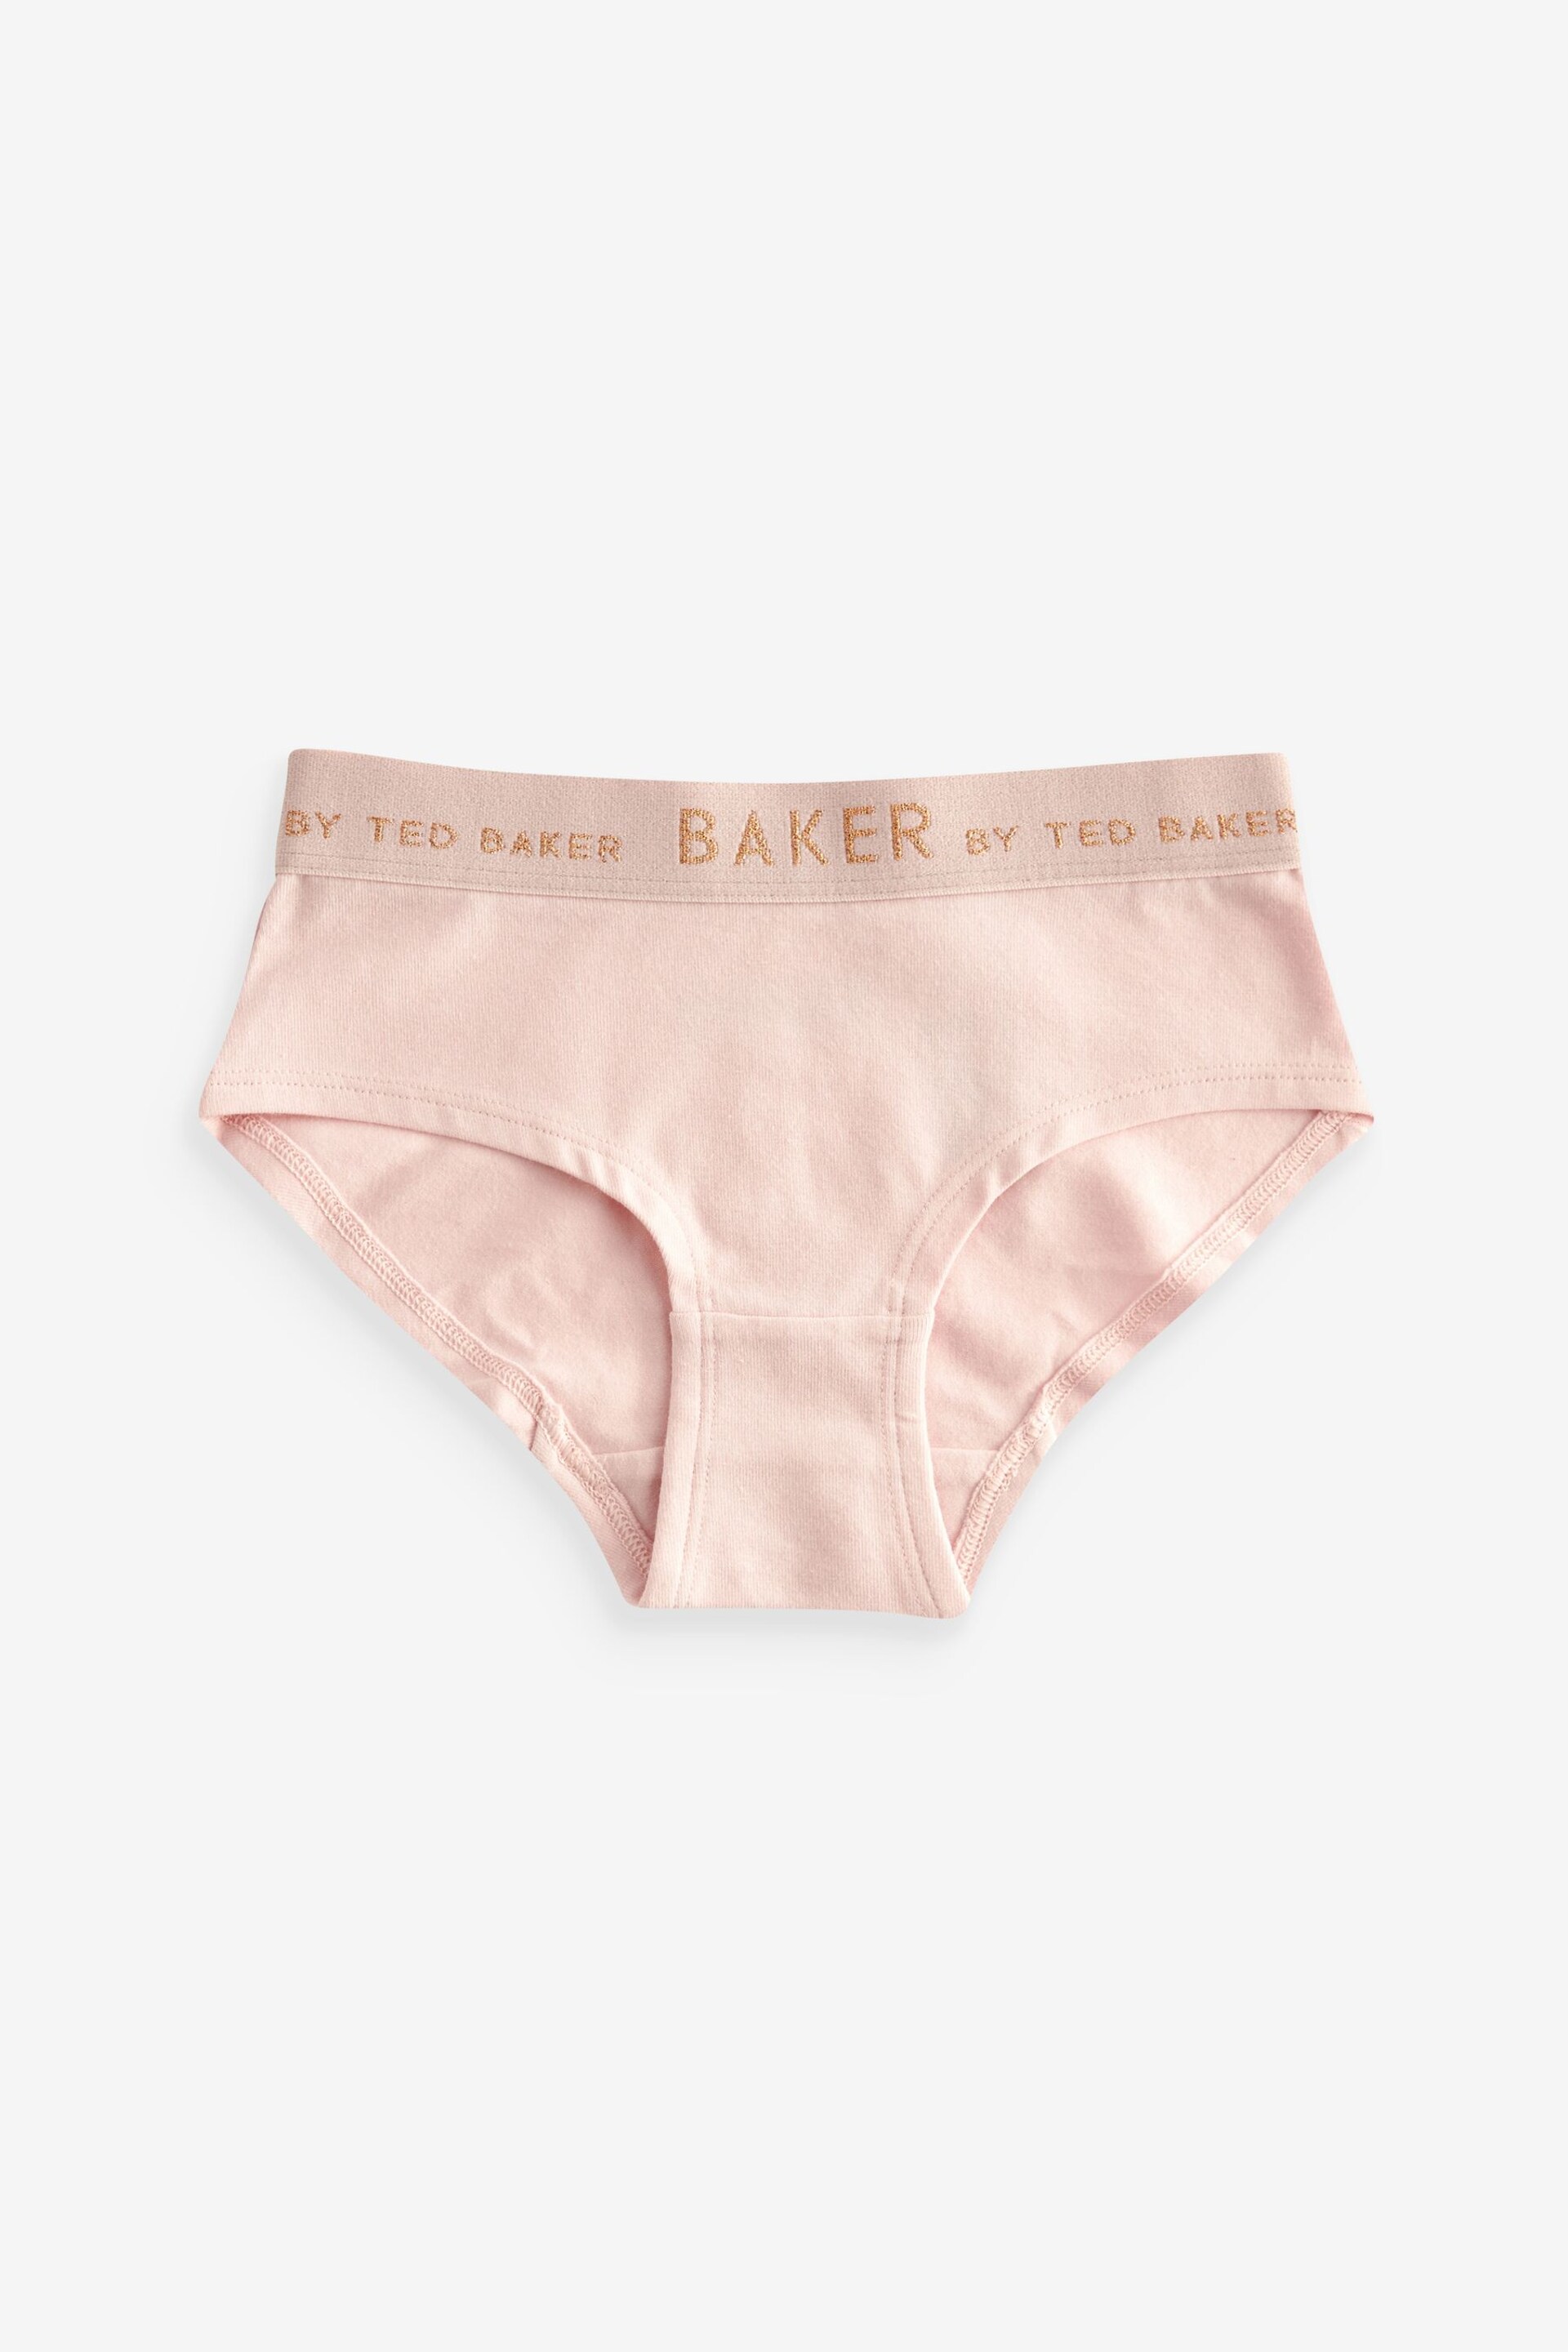 Baker by Ted Baker Briefs 3 Pack - Image 2 of 6